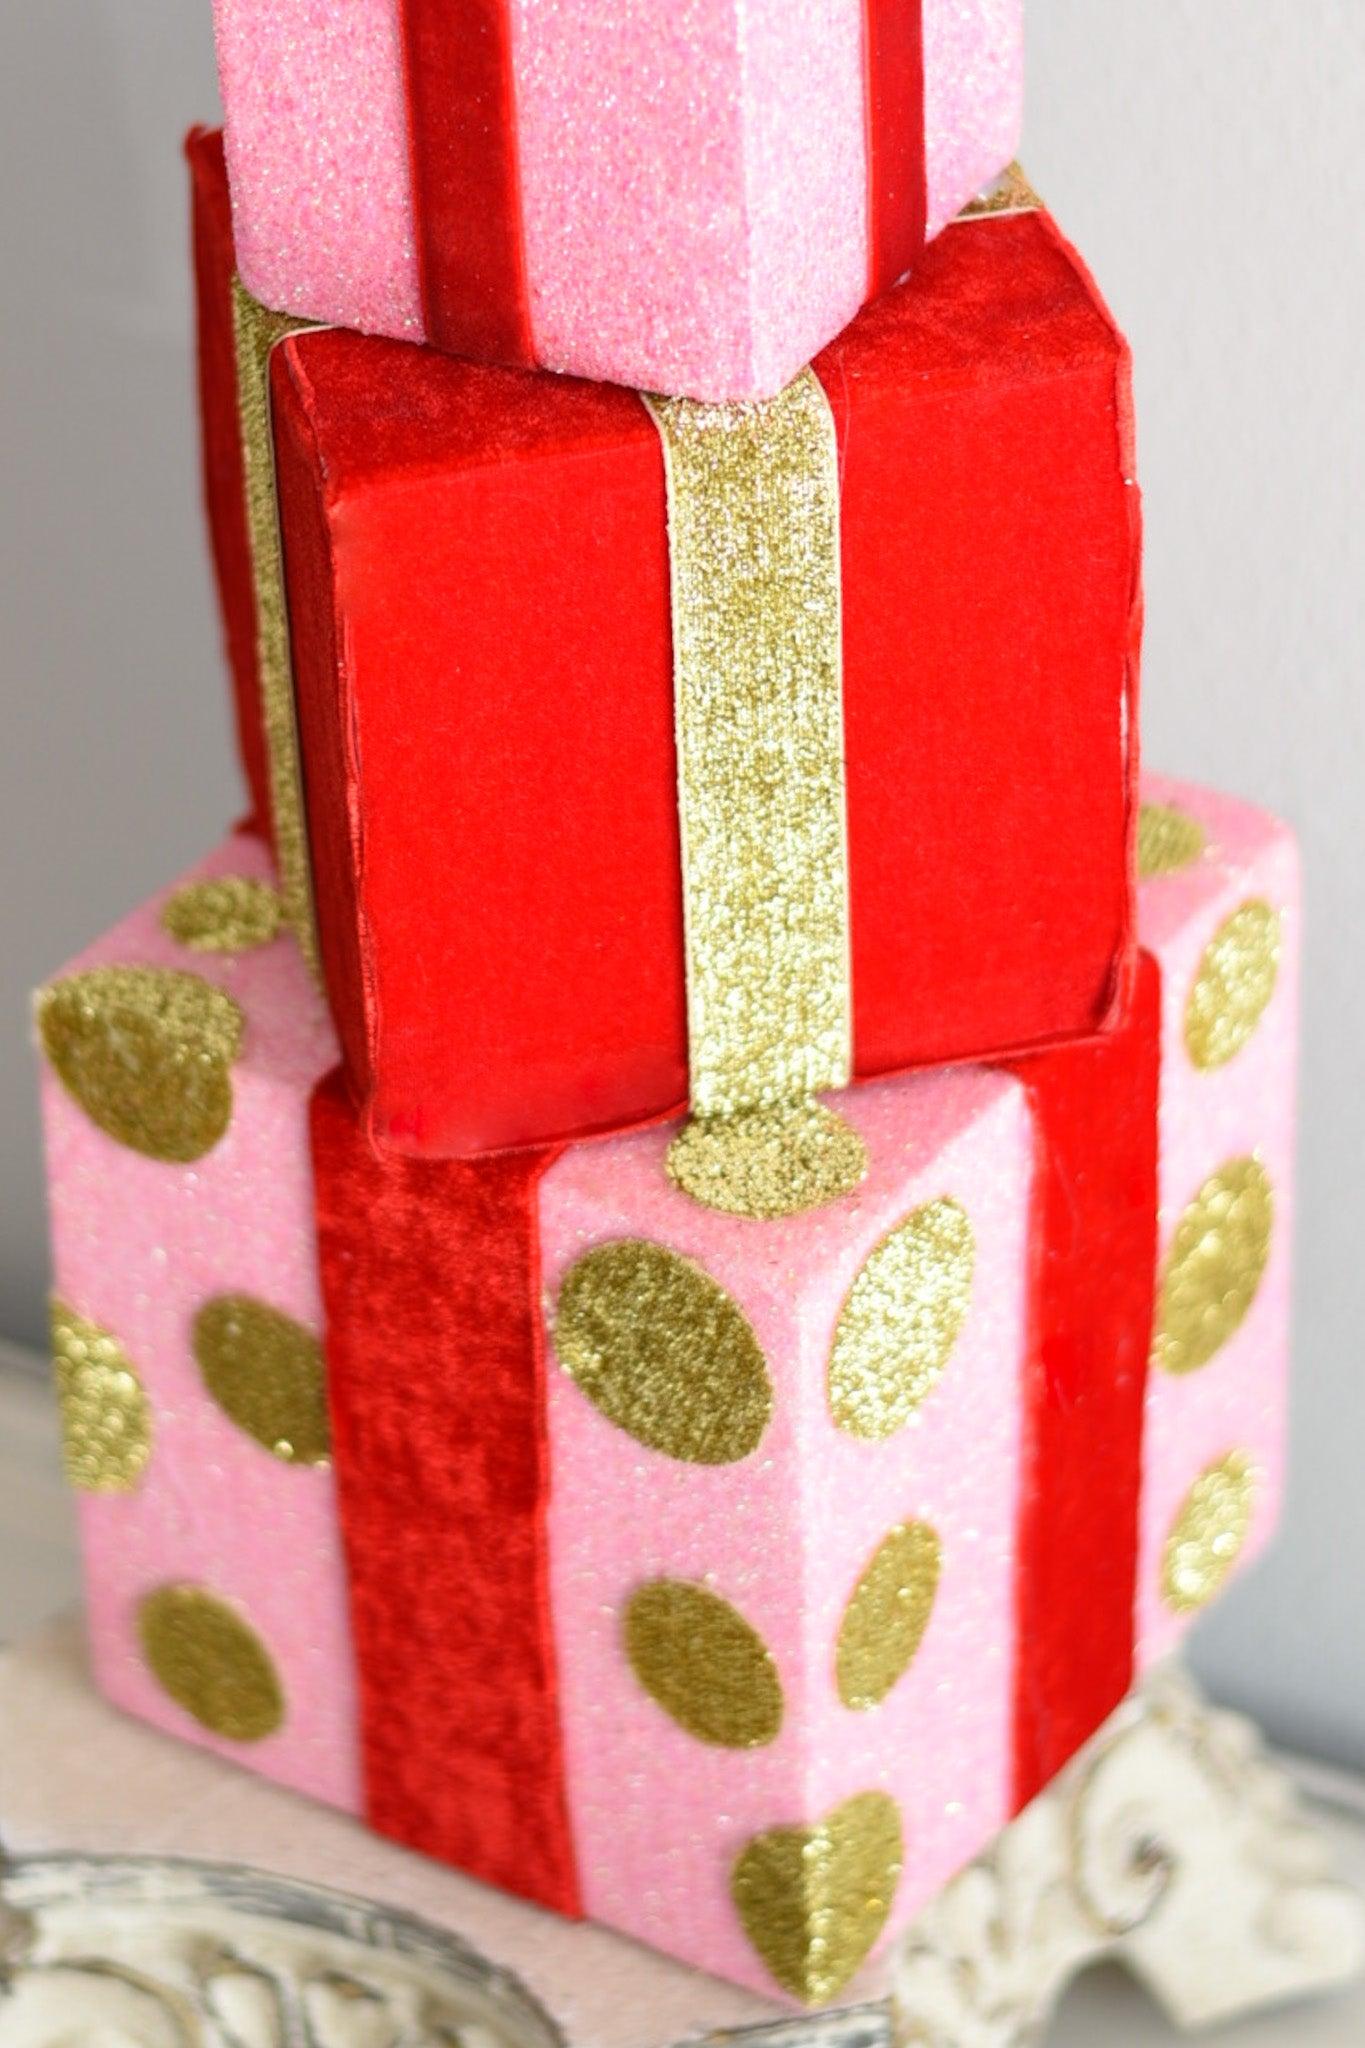 Giftbox Stack - Burlap and Bling Decor